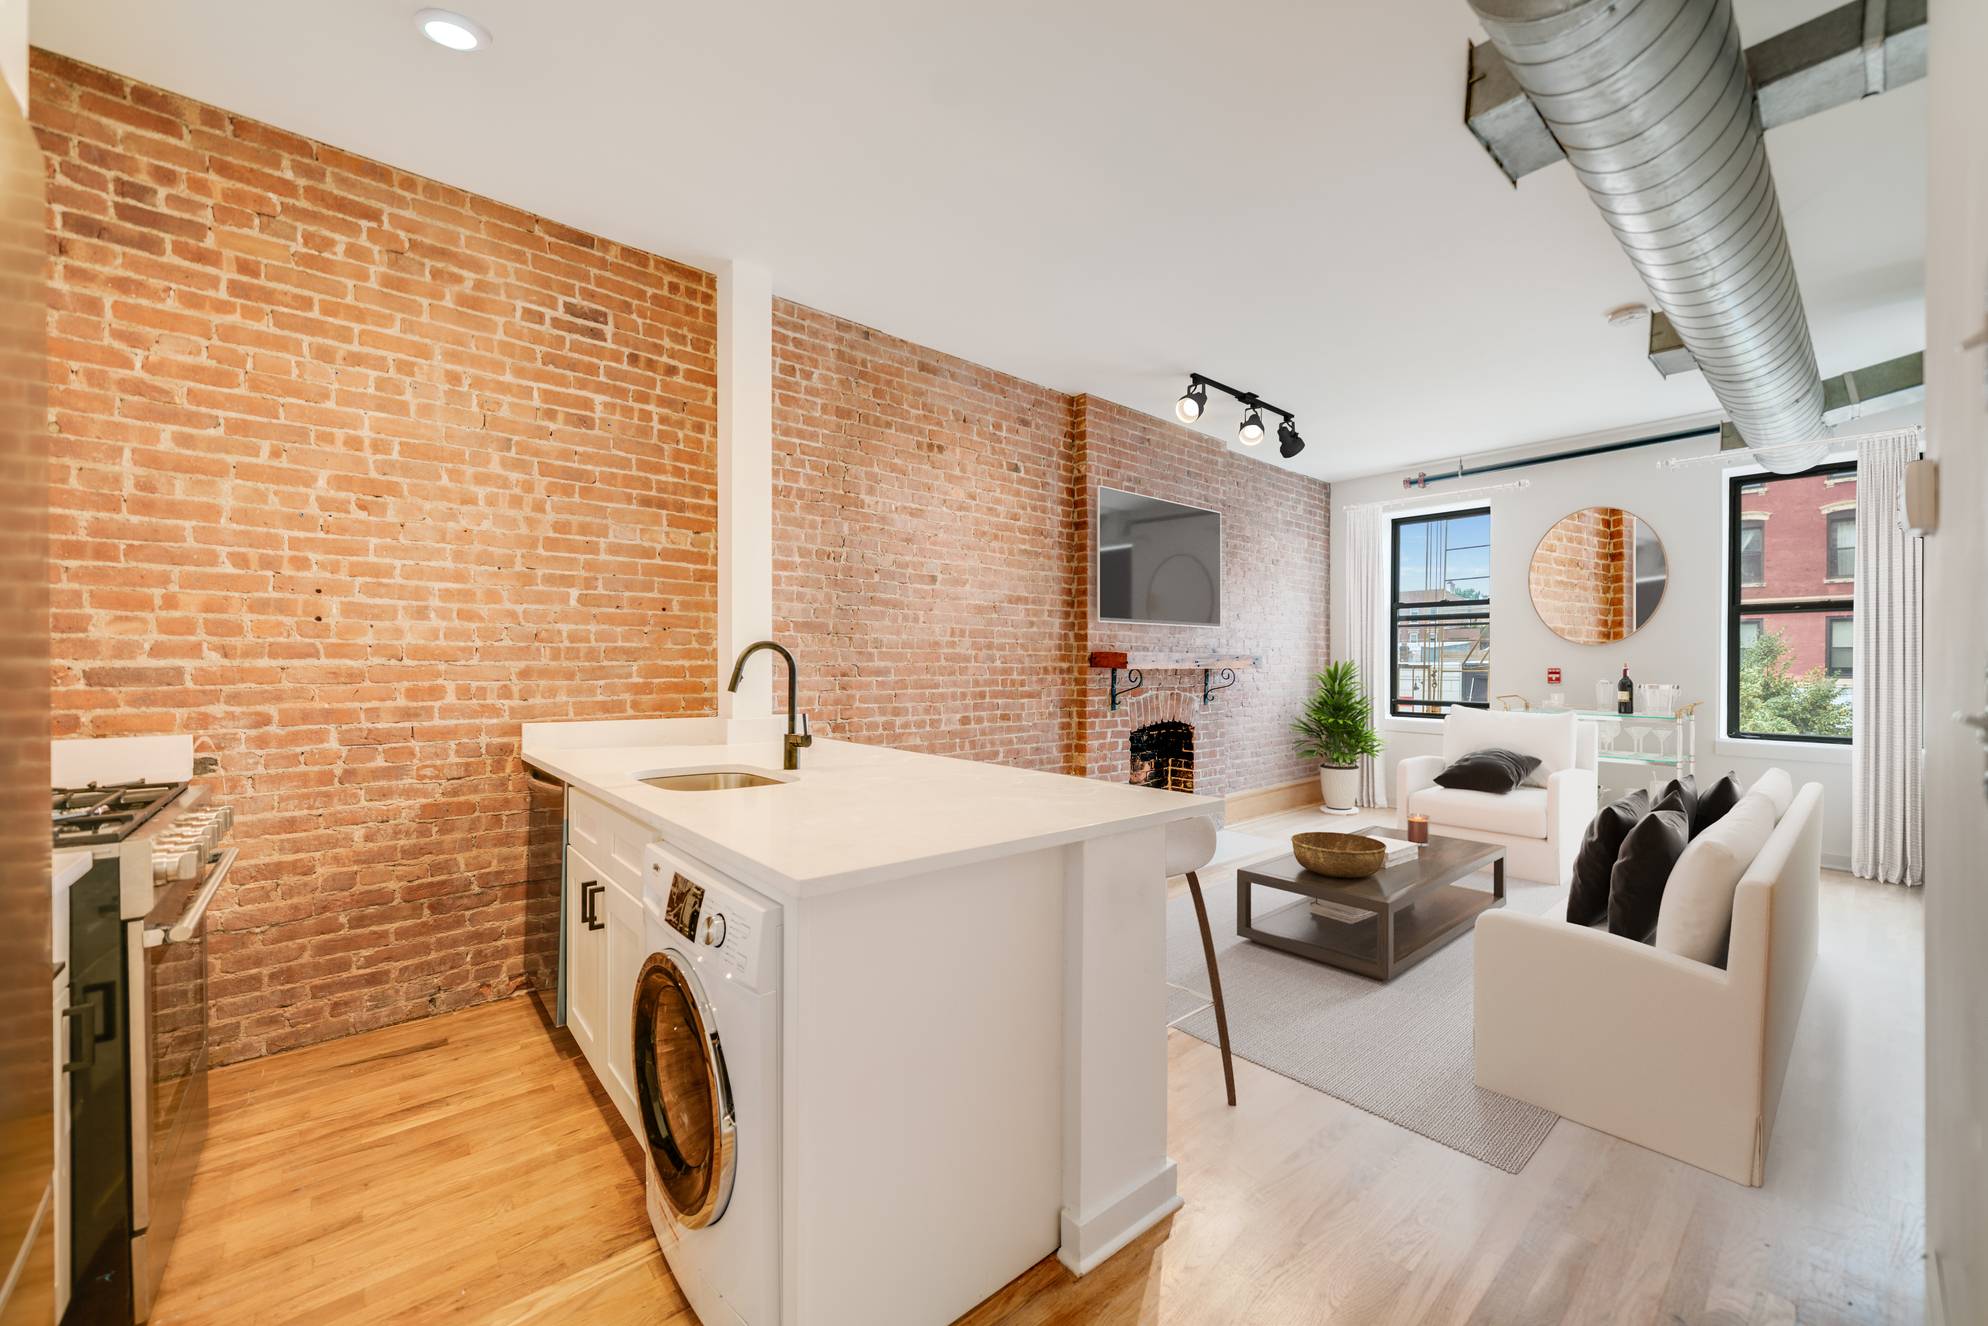 Stunning Newly Renovated 1BR Apartment on Washington Street in Downtown Hoboken!  Enjoy it all outside your doorstep!  Laundry In Unit!  Central AC and Heating!